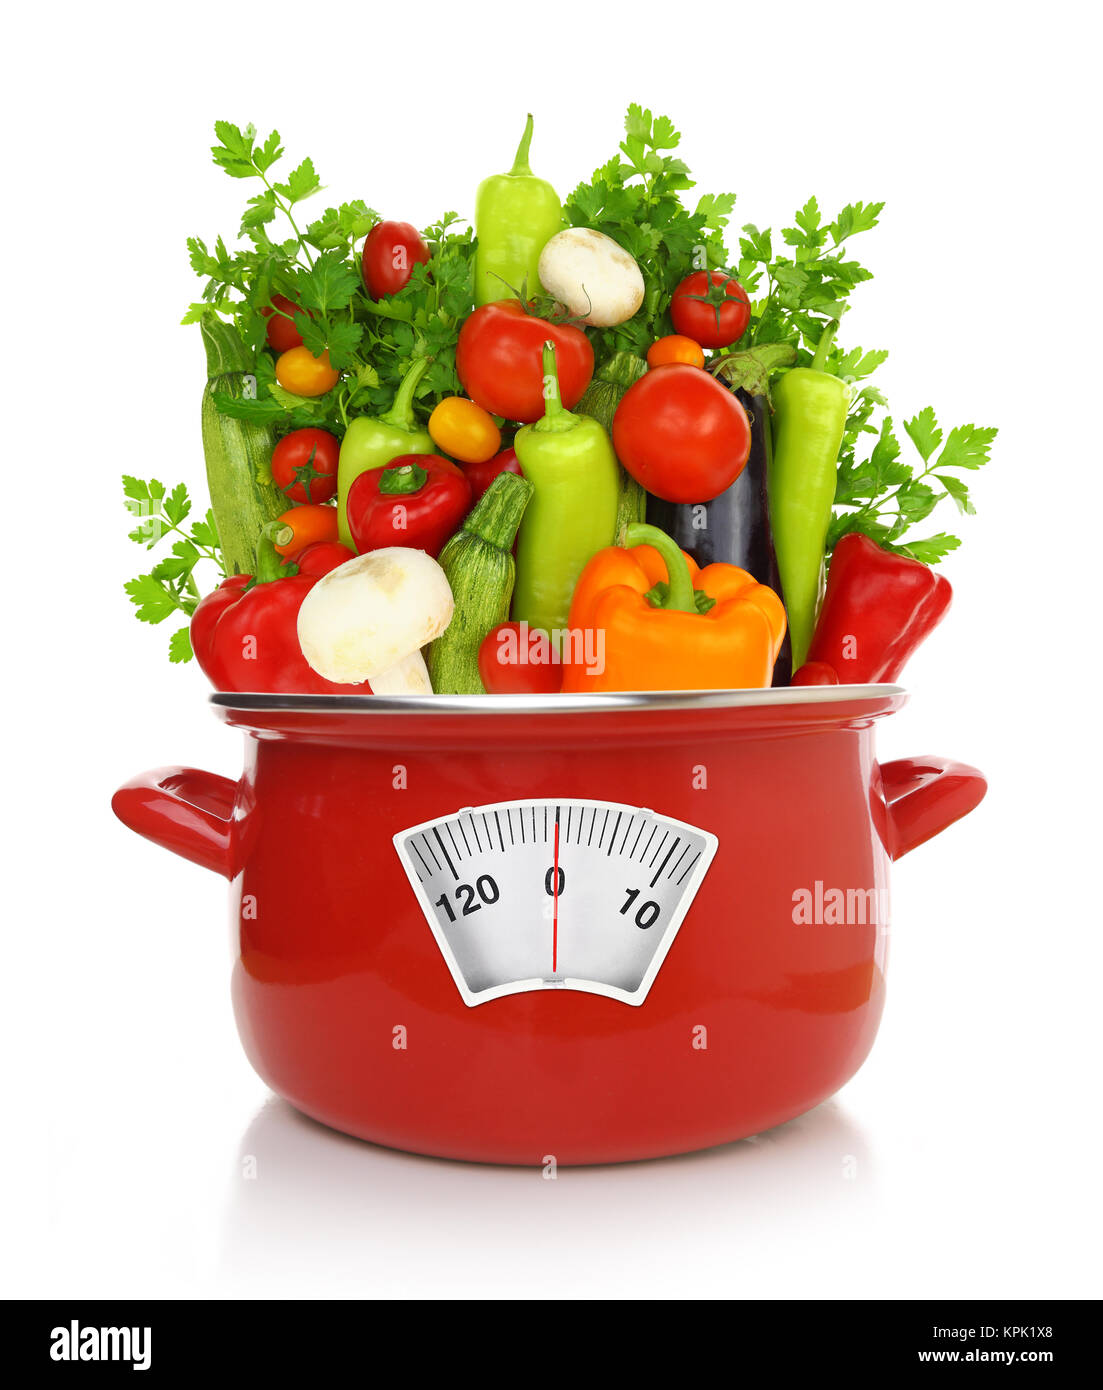 Diet concept. Colorful vegetables in a red cooking pot Stock Photo